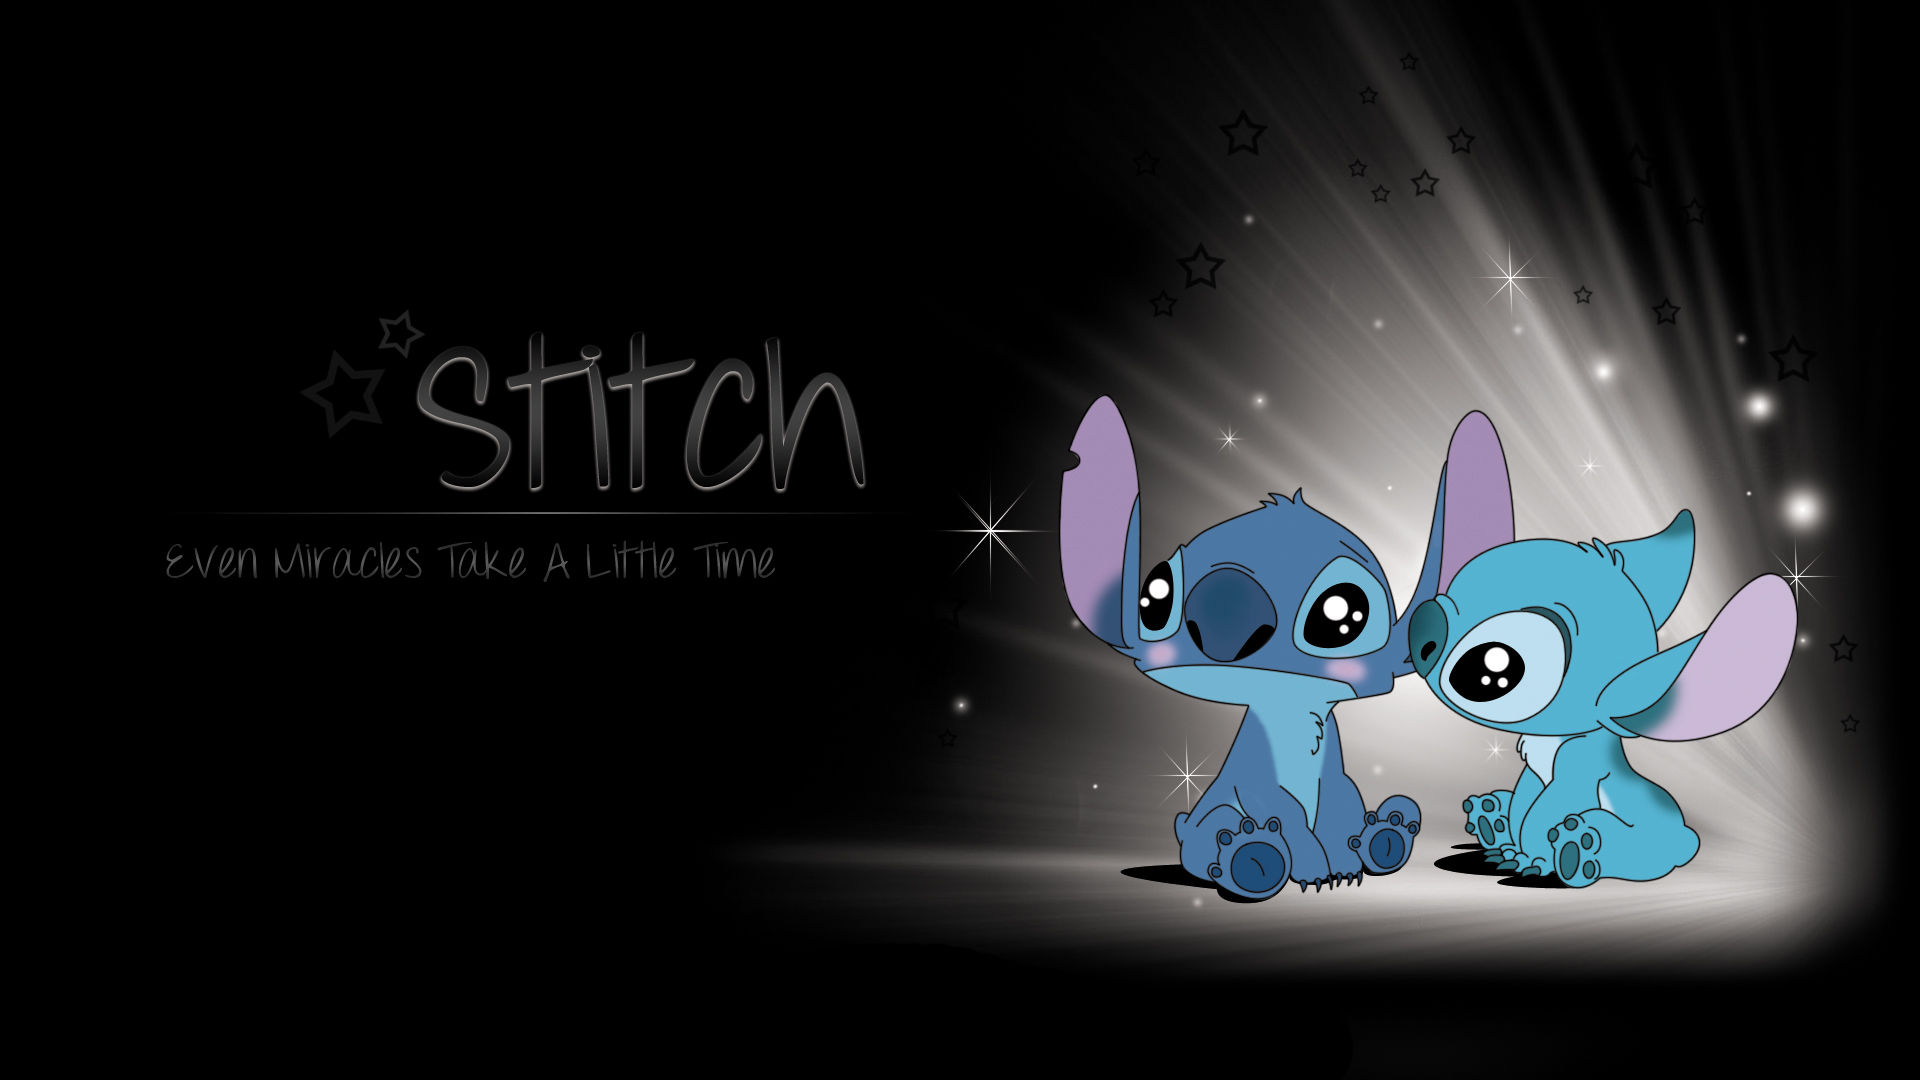 Free Stitch Backgrounds | Wallpapers, Backgrounds, Images, Art Photos.